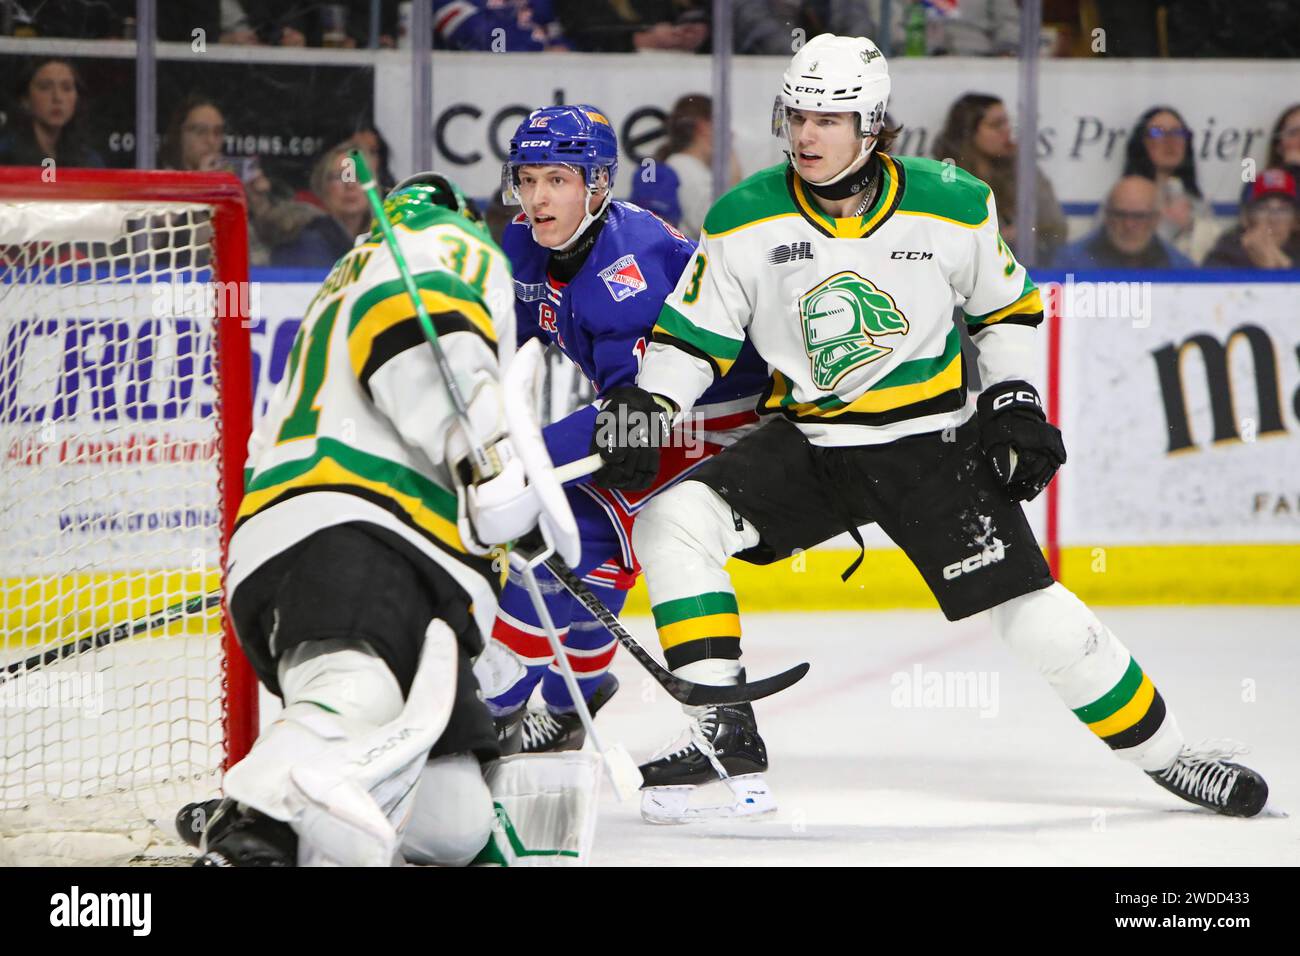 Kitchener, Canada. 19th Jan, 2024. Kitchener Ontario Canada, Jan 19 2024, The London Knights extend their winning streak to 13 games with a win over Kitchener. Sam Dickinson(3)of the London Knights. (Editorial Only) Credit: Luke Durda/Alamy Live News Stock Photo